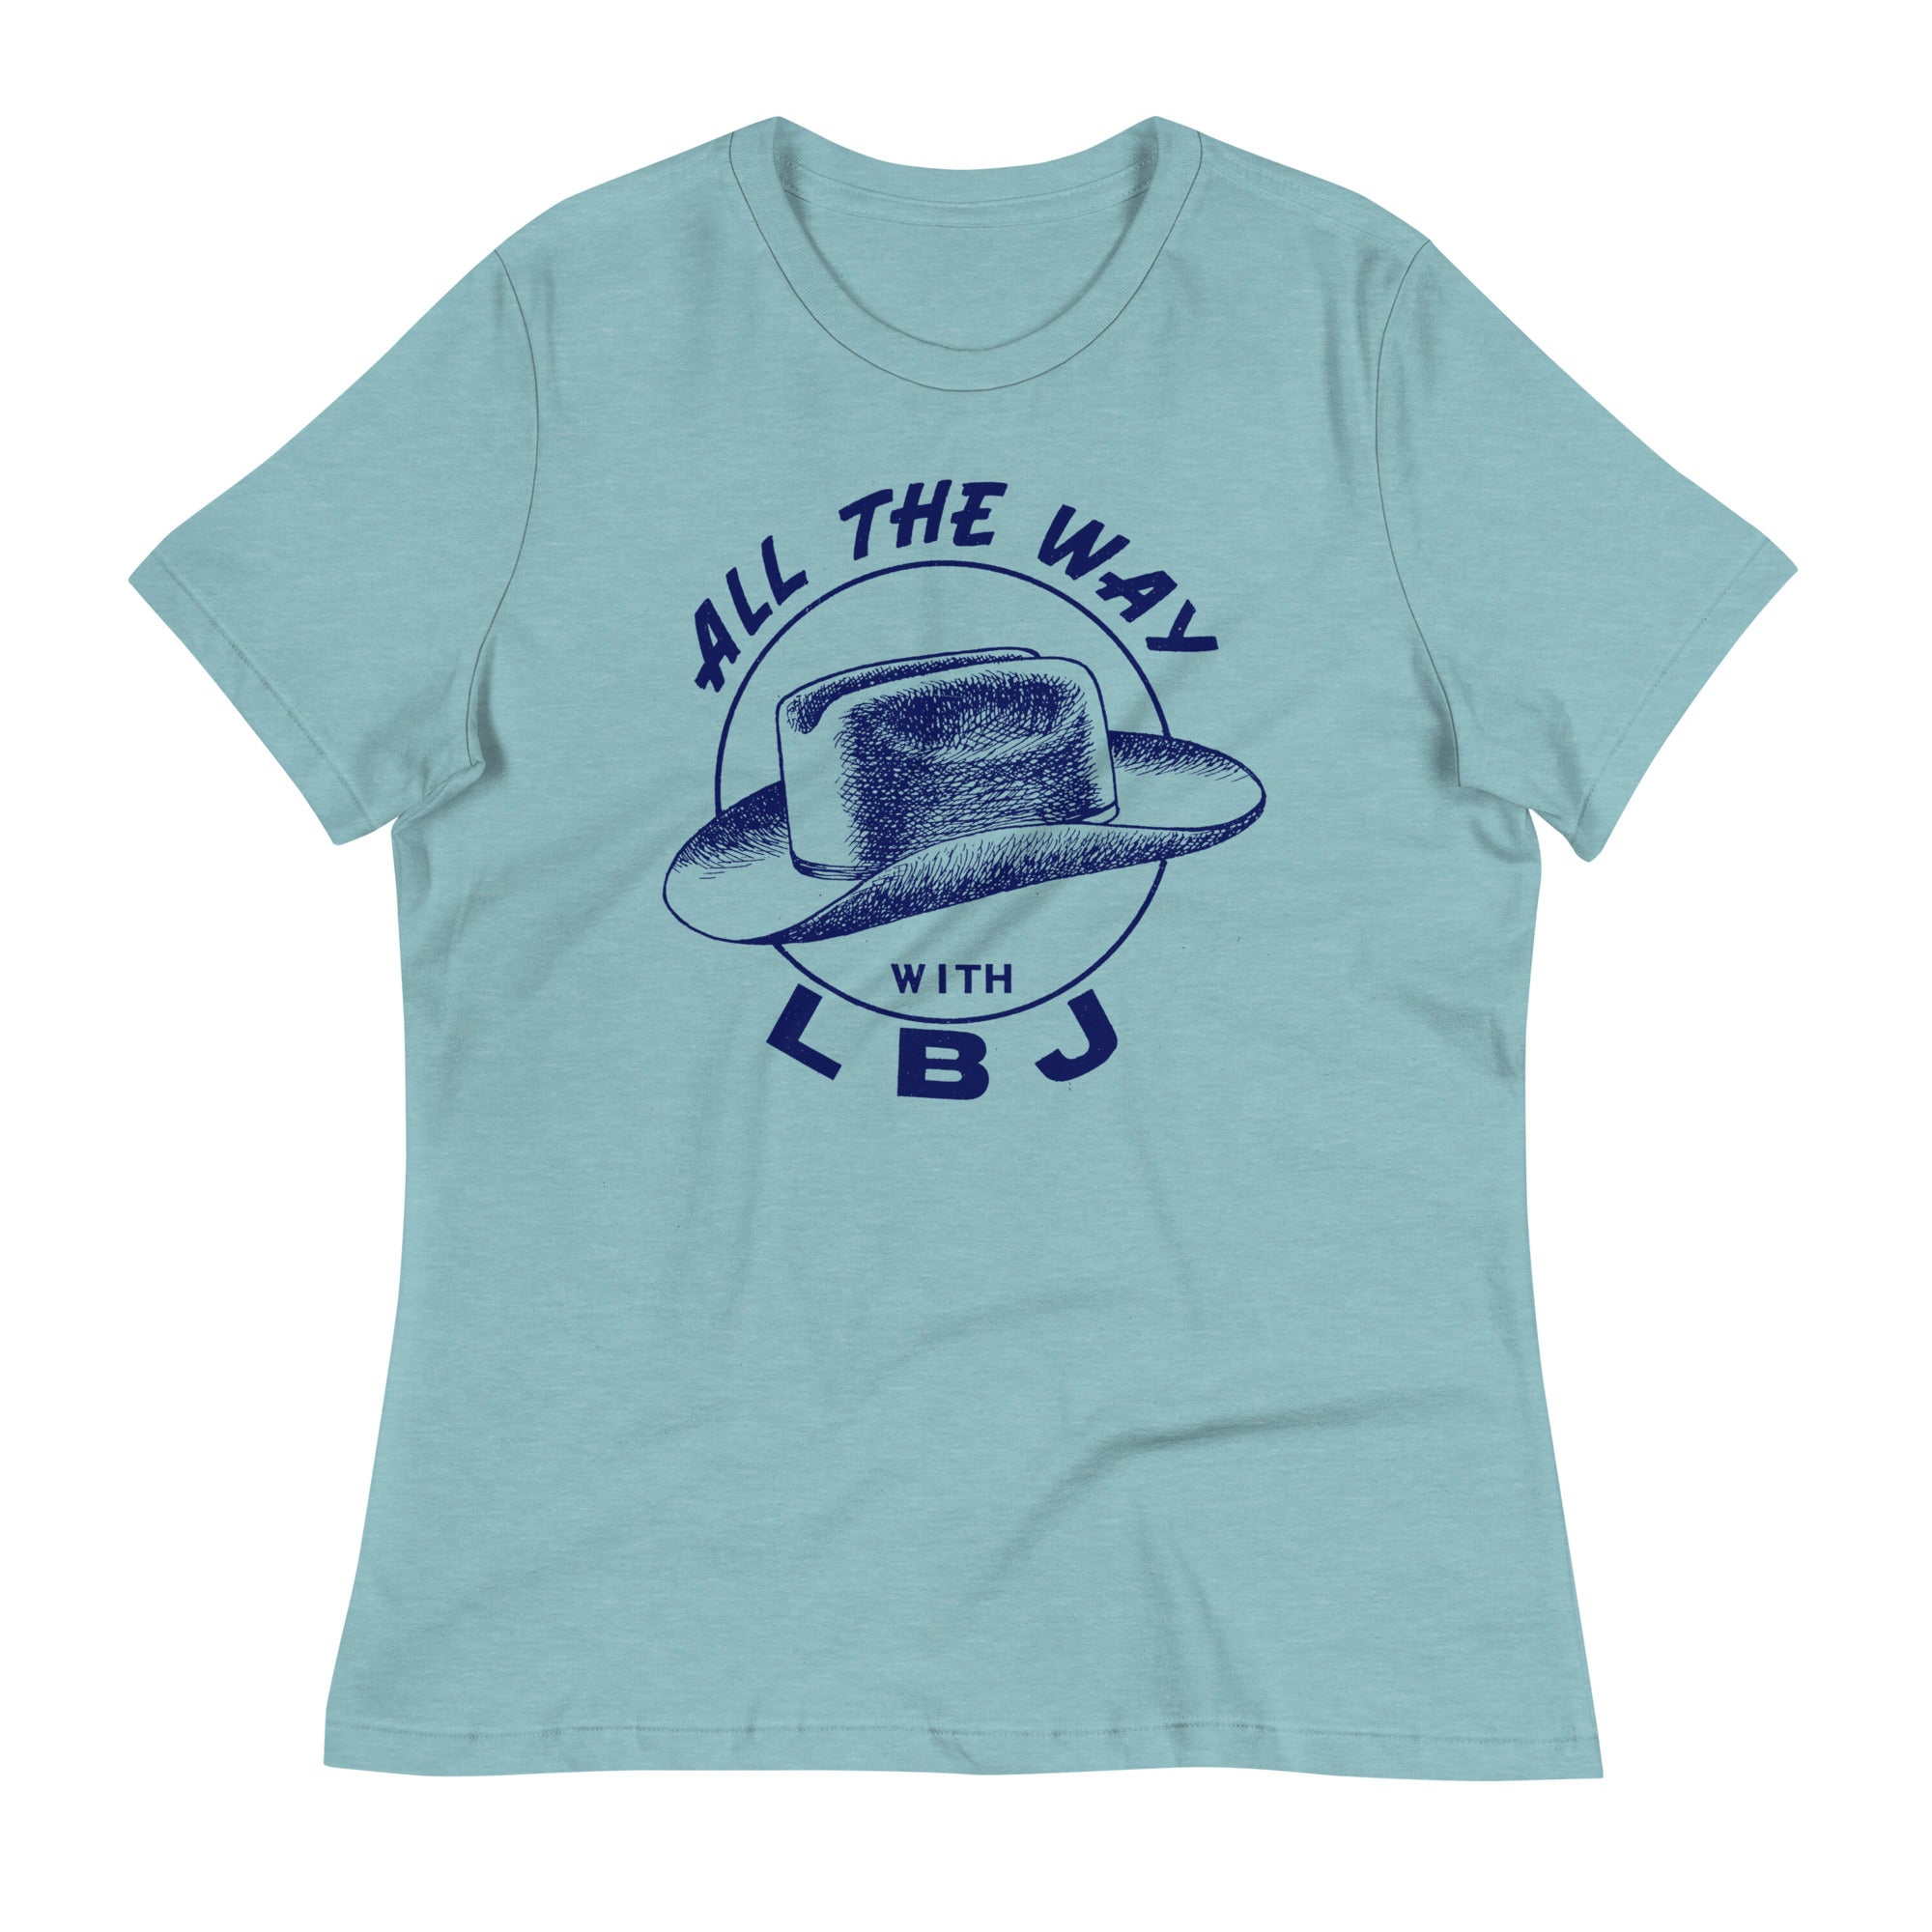 All the Way with LBJ 1964 Reproduction Campaign Women's Relaxed T-Shirt